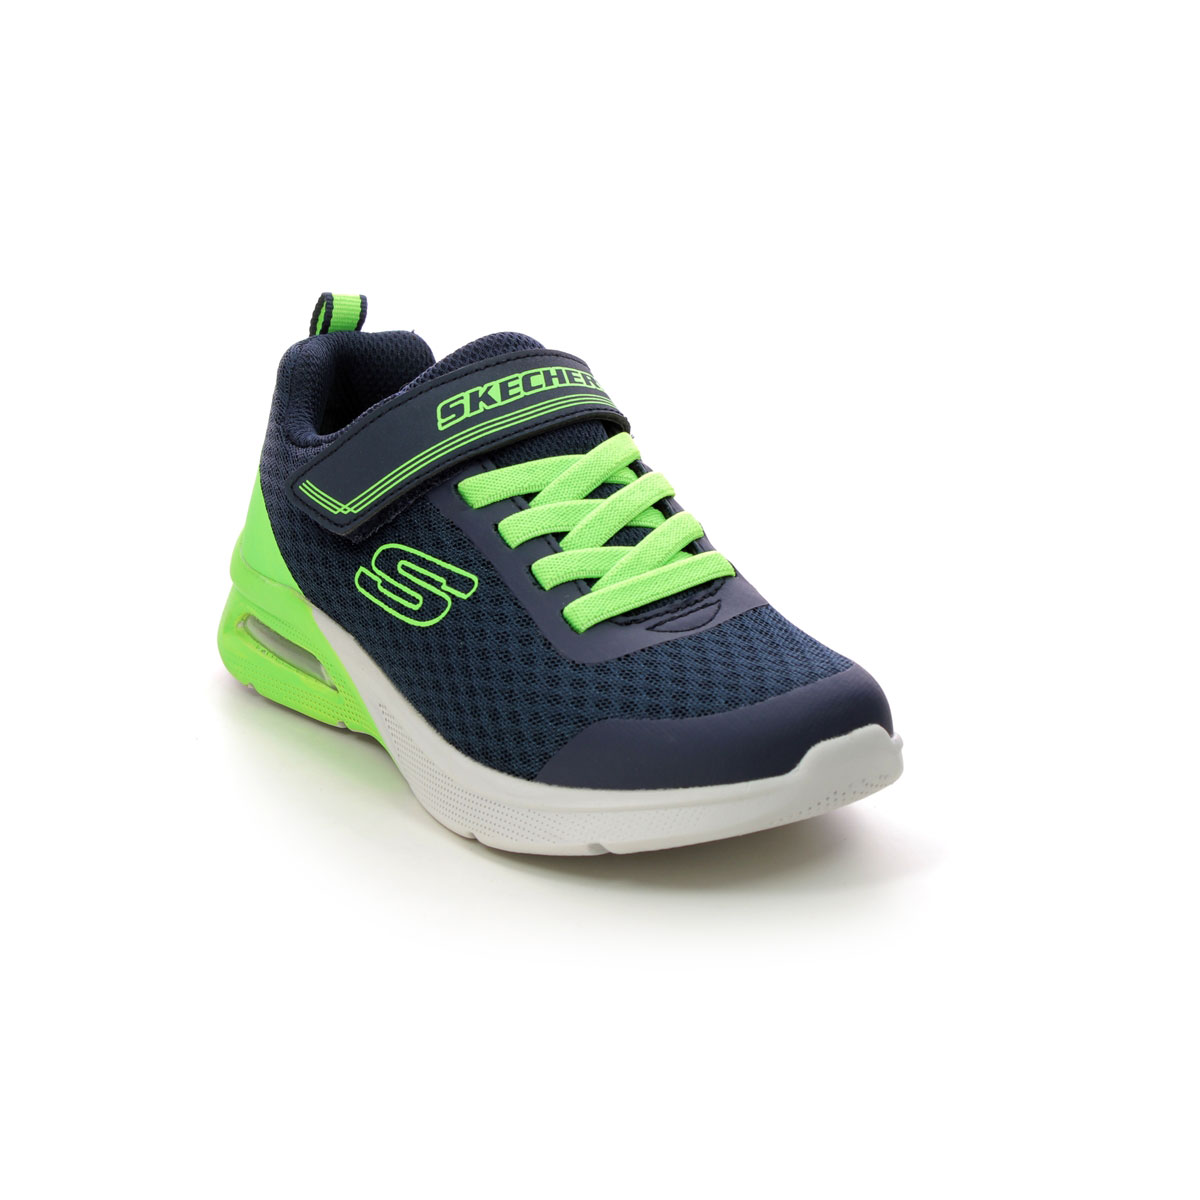 Skechers Microspec Max Navy Lime Kids Trainers 403773L In Size 28 In Plain Navy Lime For kids